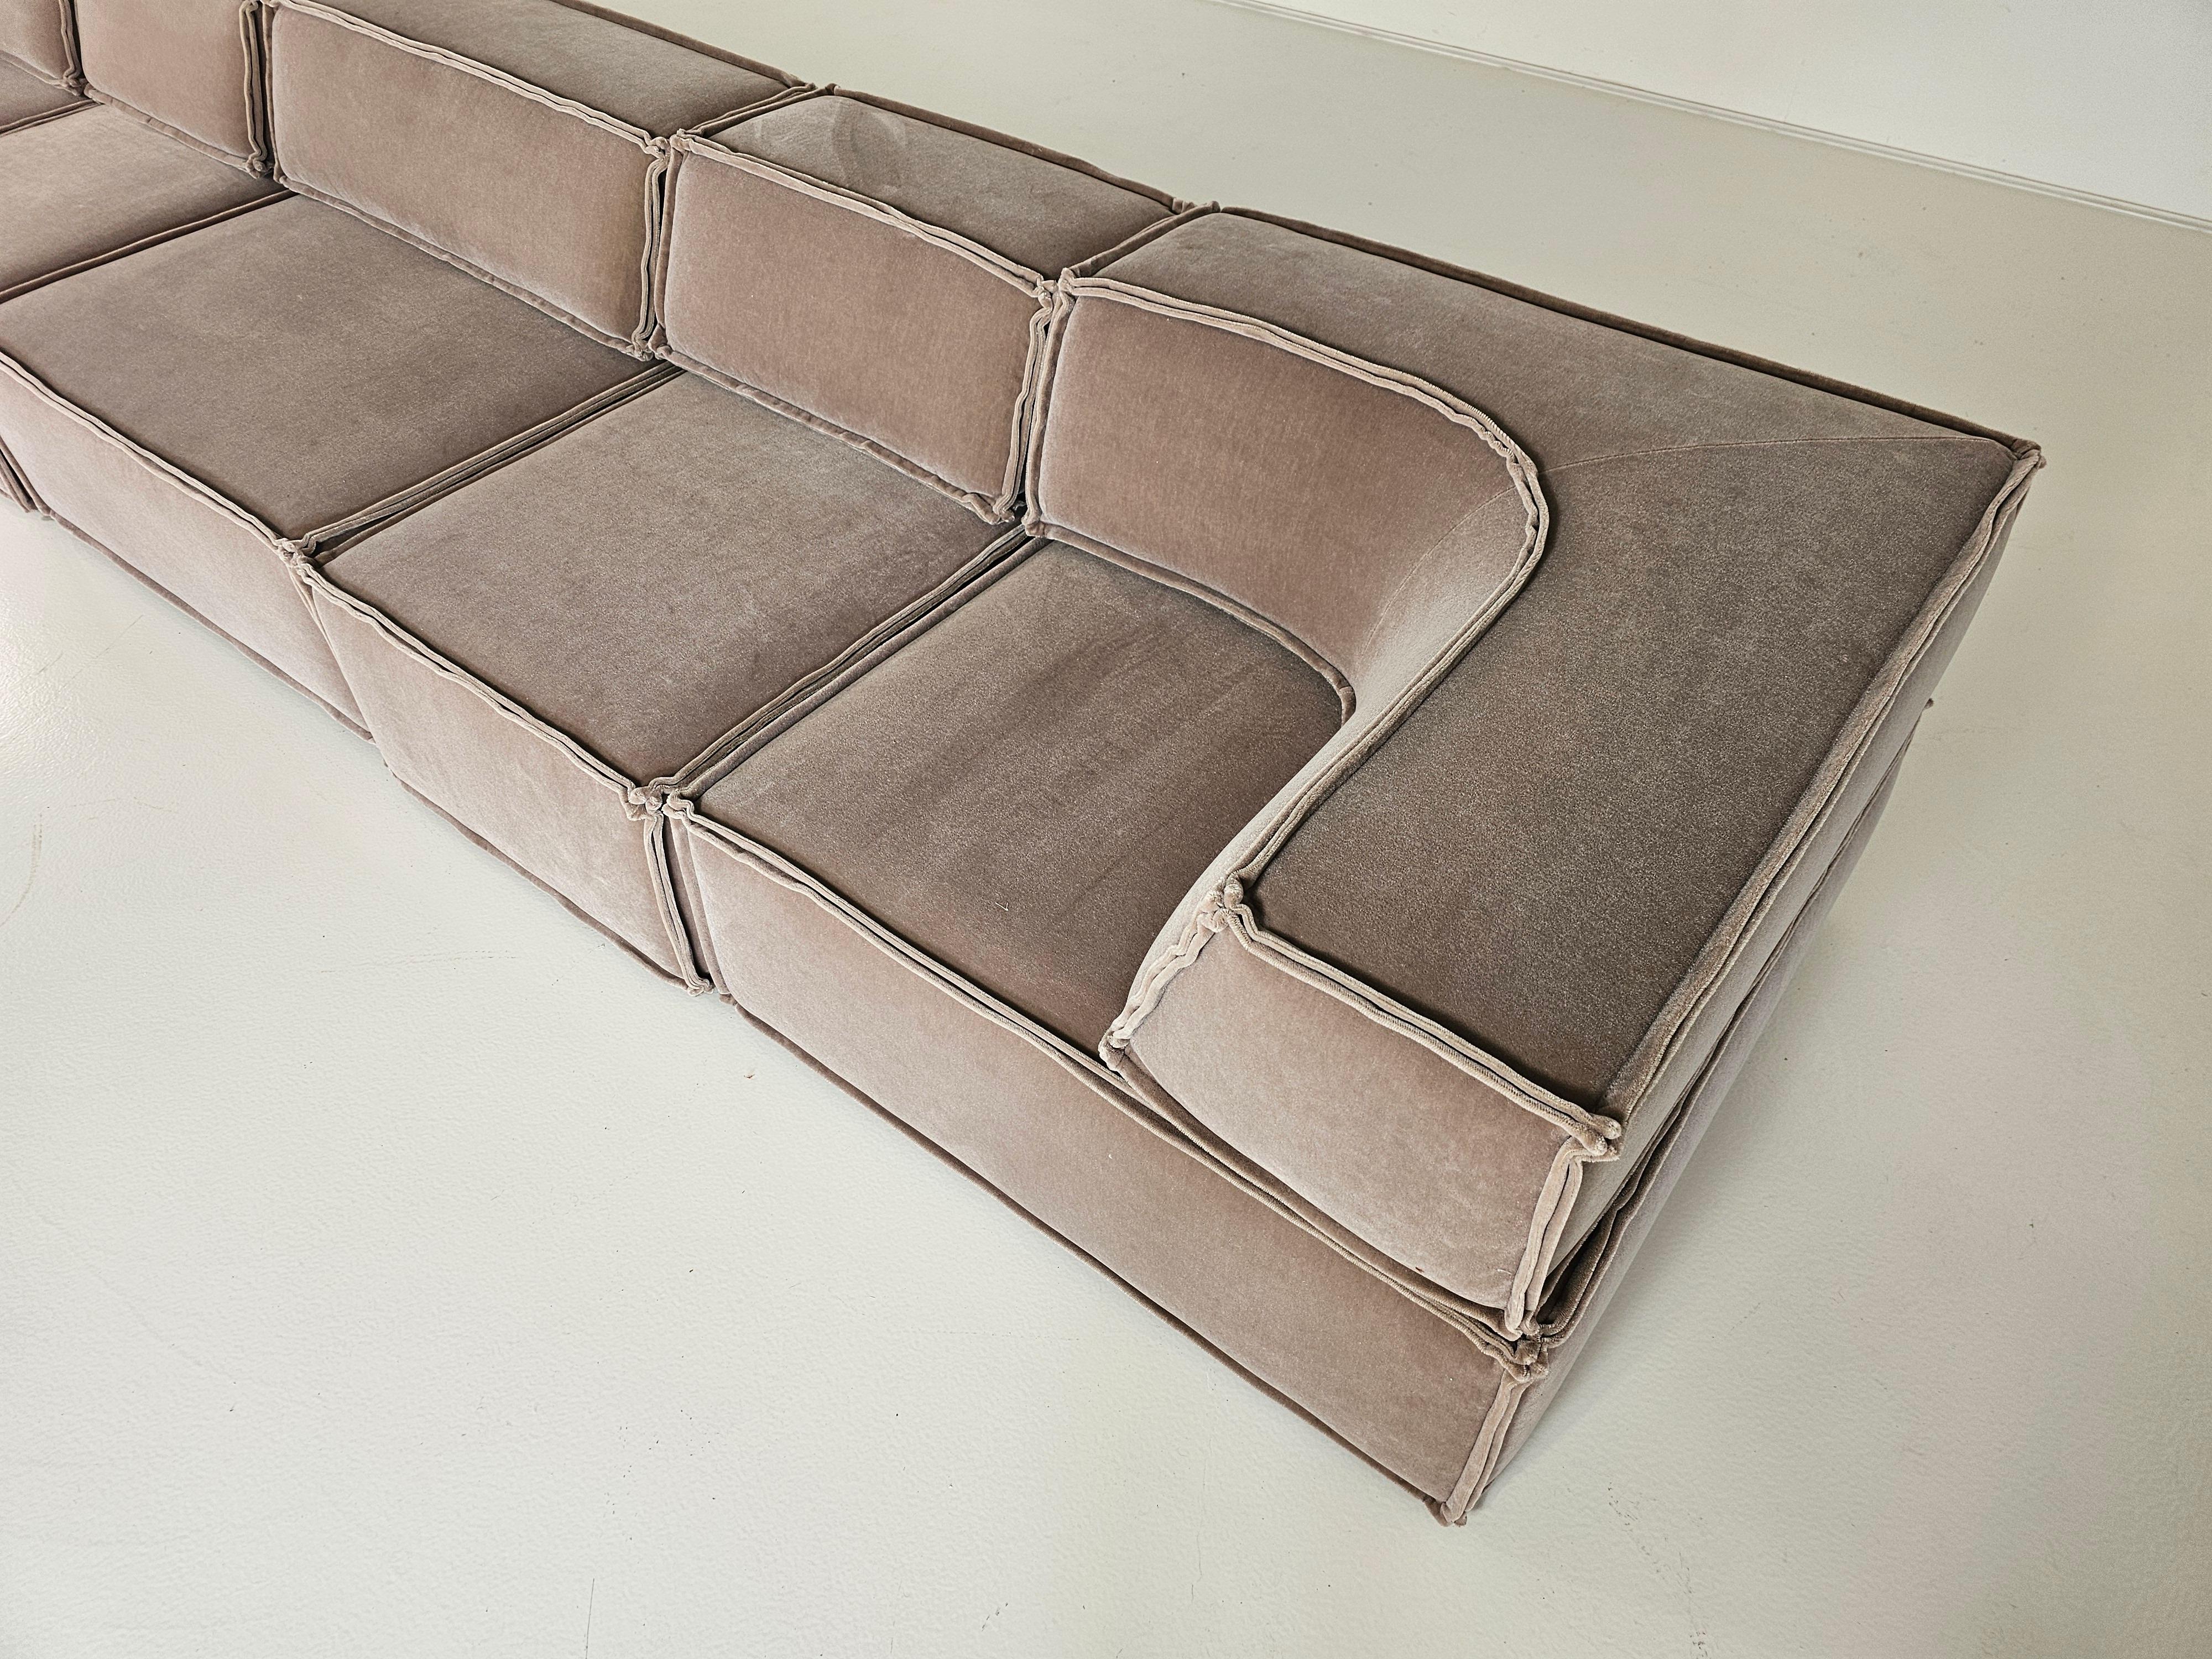 COR Trio Sofa in beige mohair by Team Form Ag for COR Furniture, Germany, 1970s In Excellent Condition For Sale In amstelveen, NL